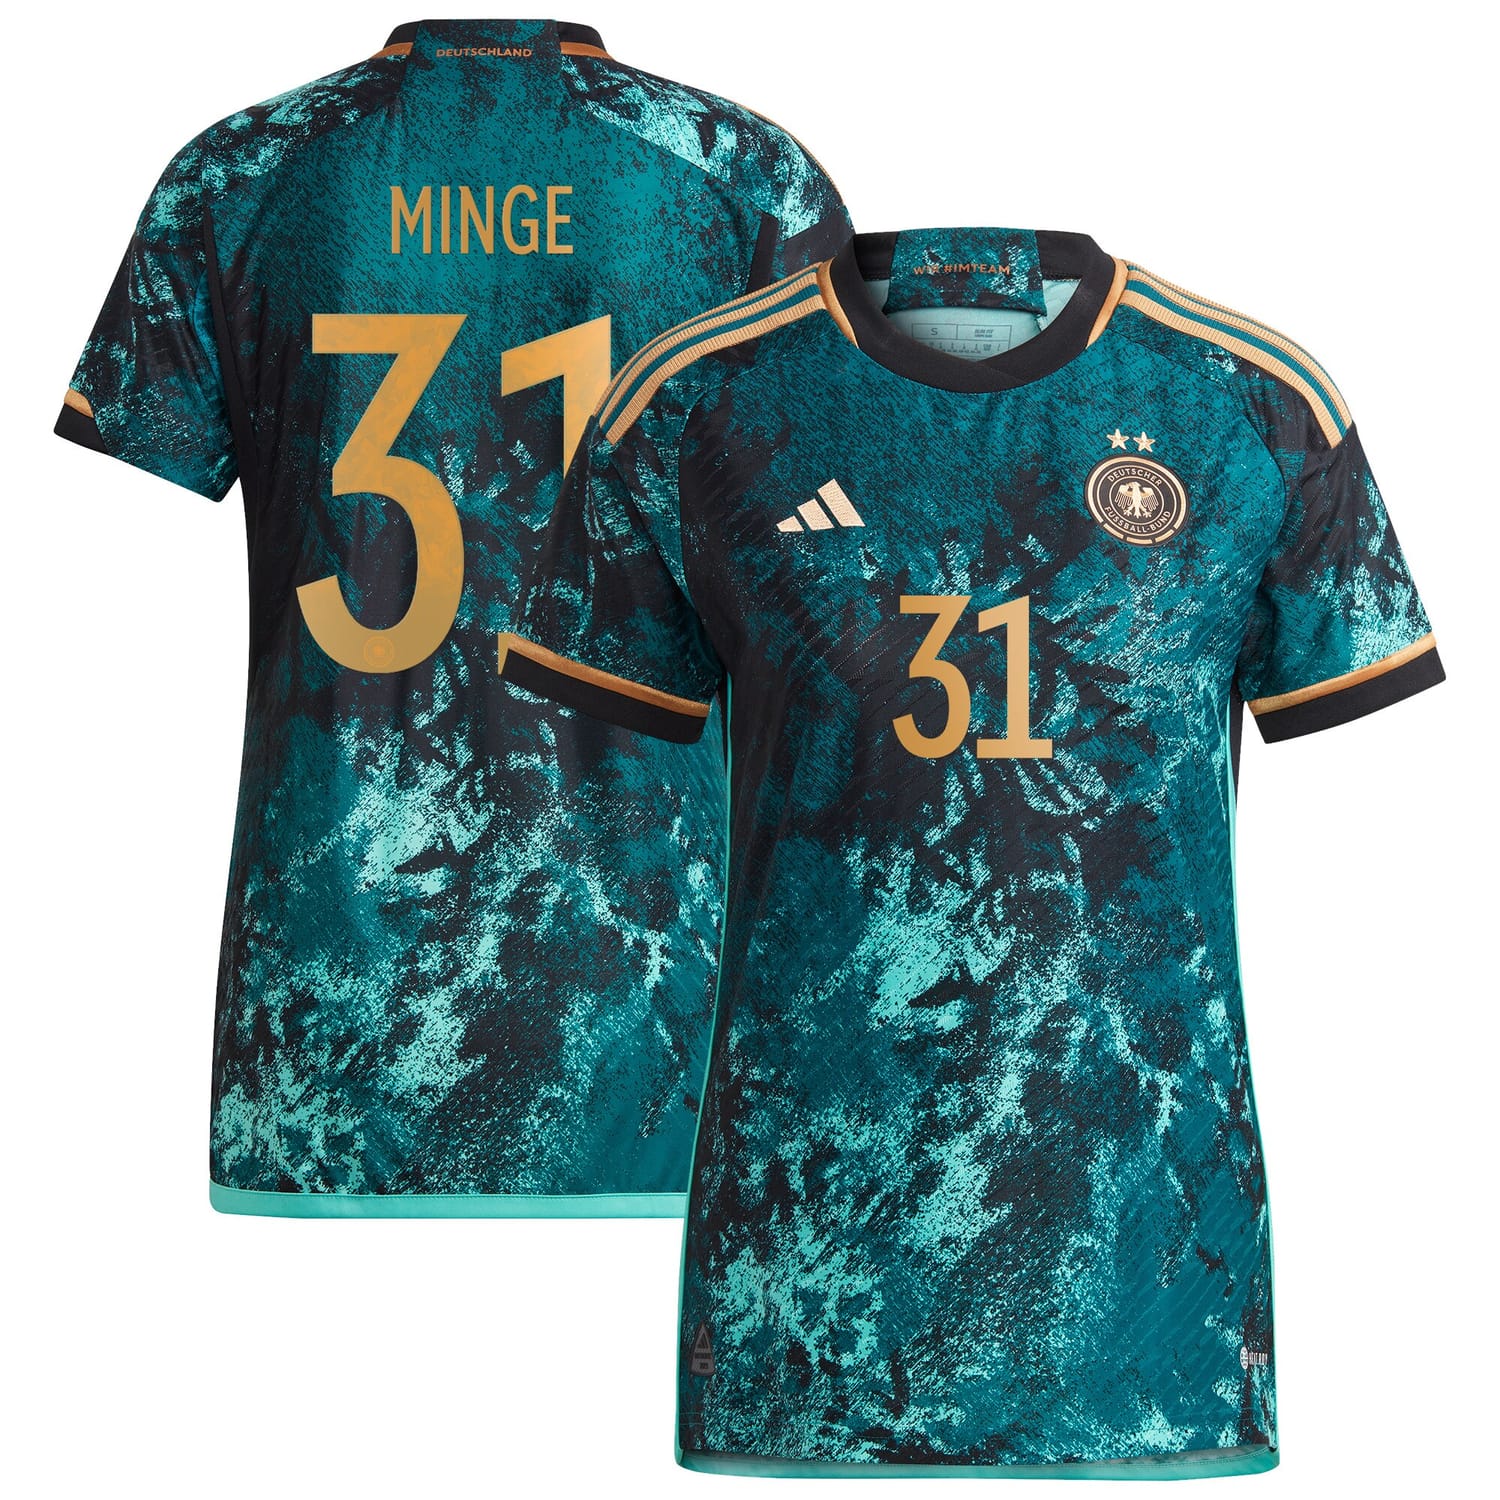 Germany National Team Away Authentic Jersey Shirt 2023 player Janina Minge 31 printing for Women